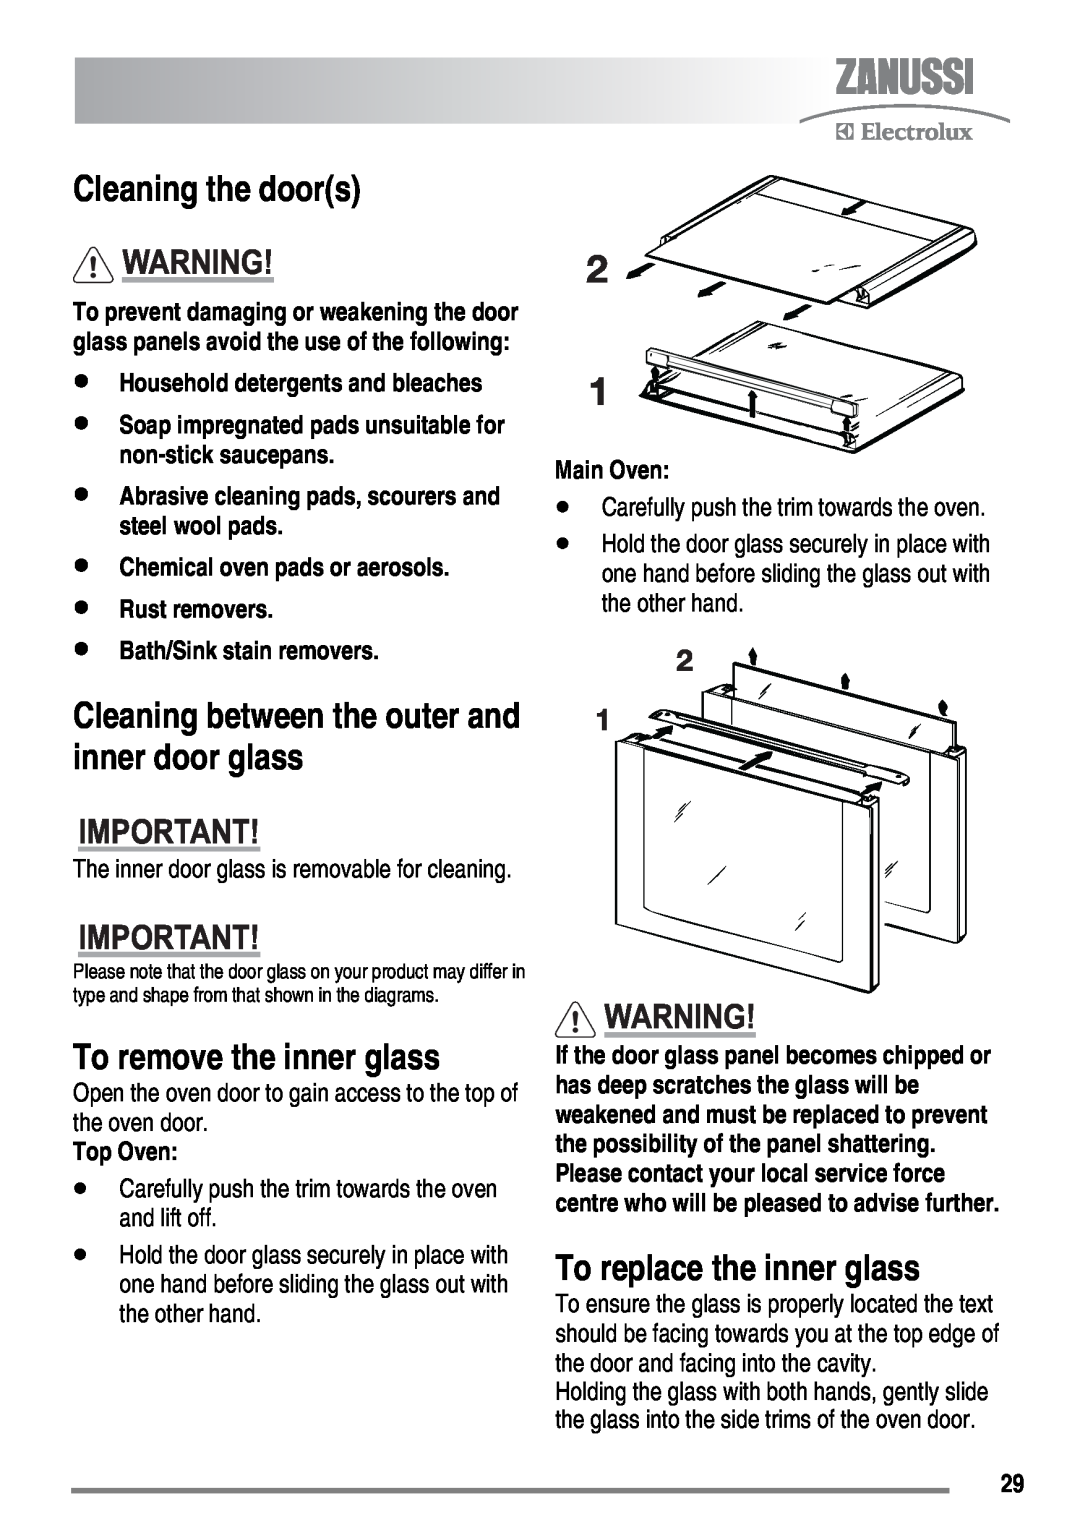 Zanussi FH10 user manual Cleaning the doors, To remove the inner glass, To replace the inner glass, Top Oven, Main Oven 